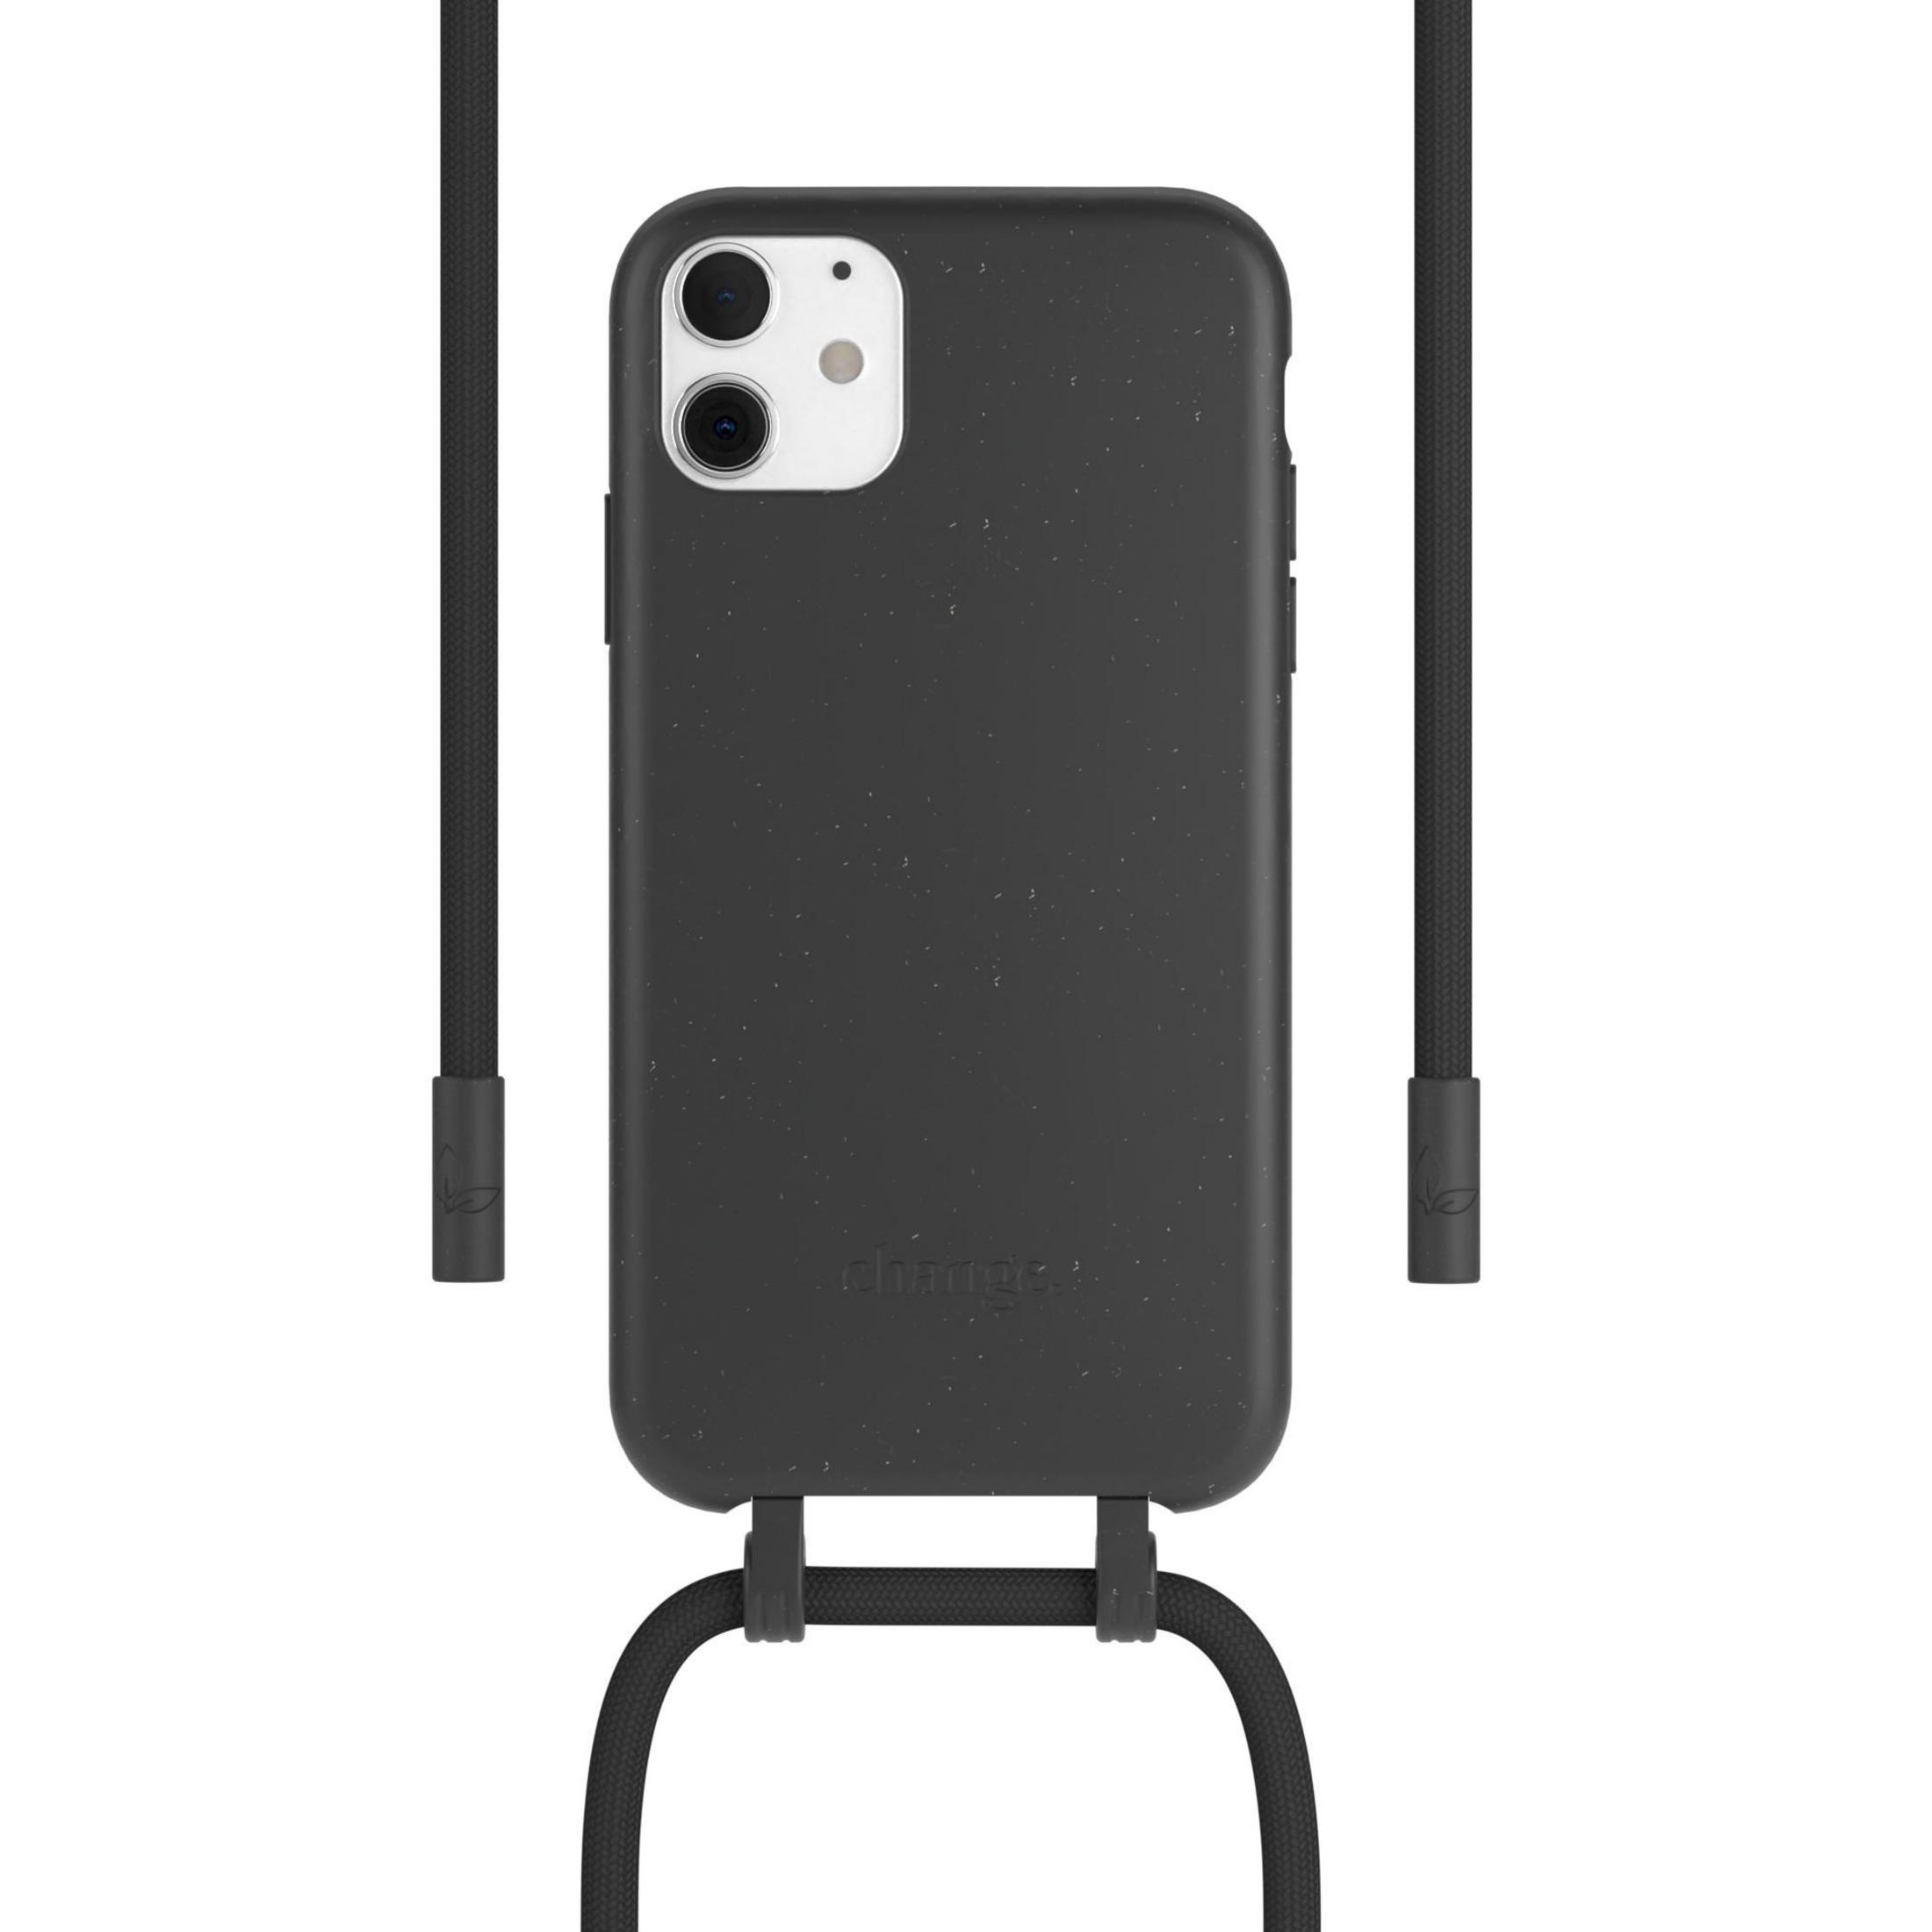 BIO CHA014 iPhone Xr, iPhone Backcover, 11, IP BLACK, 11 NECKLACE Schwarz Apple, WOODCESSORIES AM XR